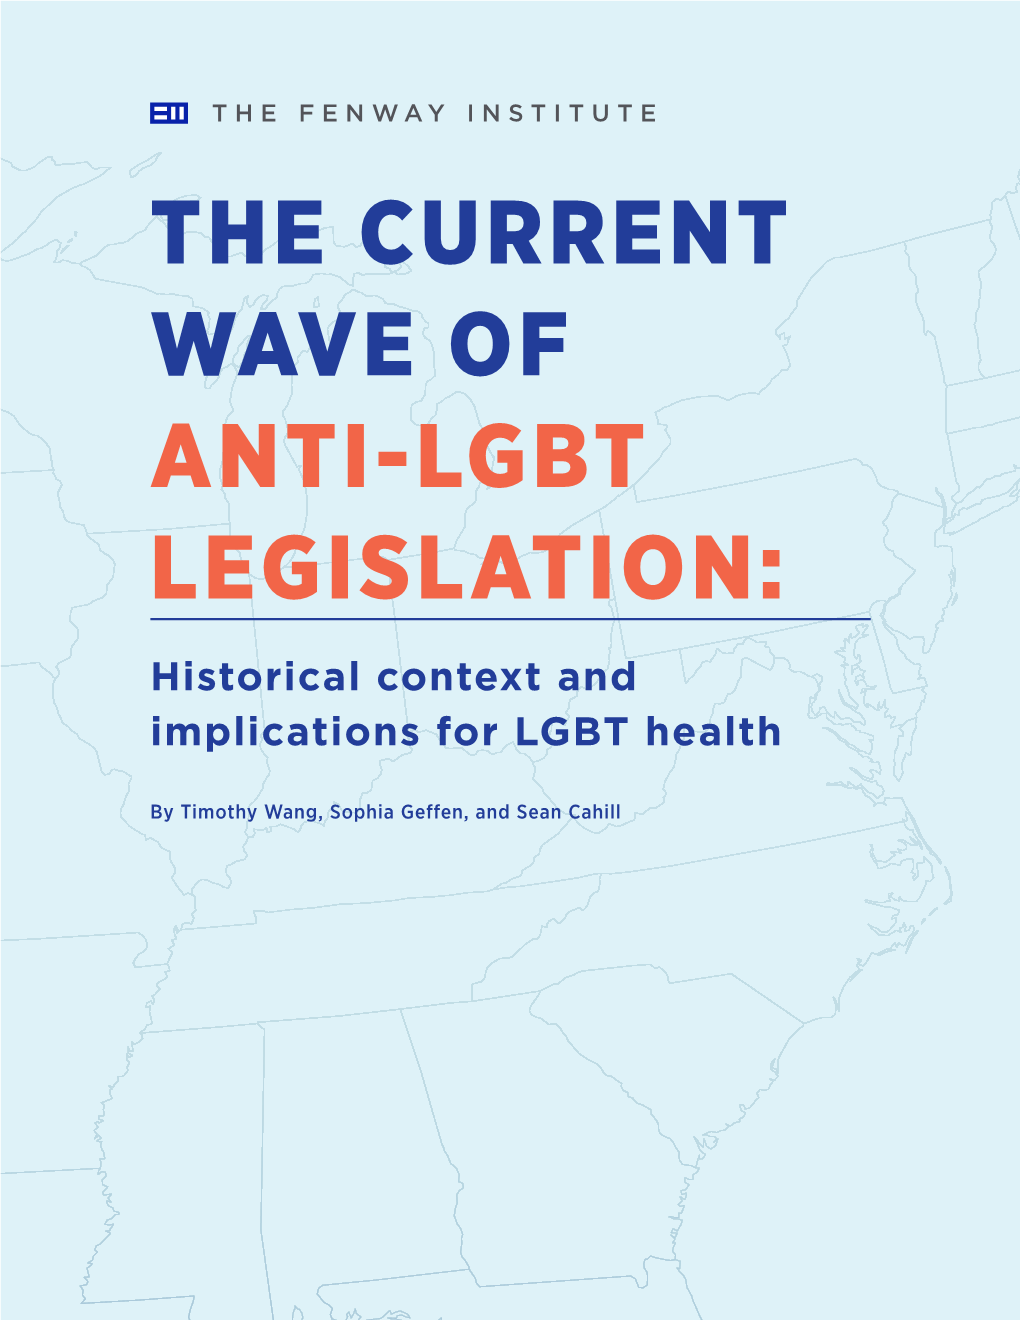 THE CURRENT WAVE of ANTI-LGBT LEGISLATION: Historical Context and Implications for LGBT Health